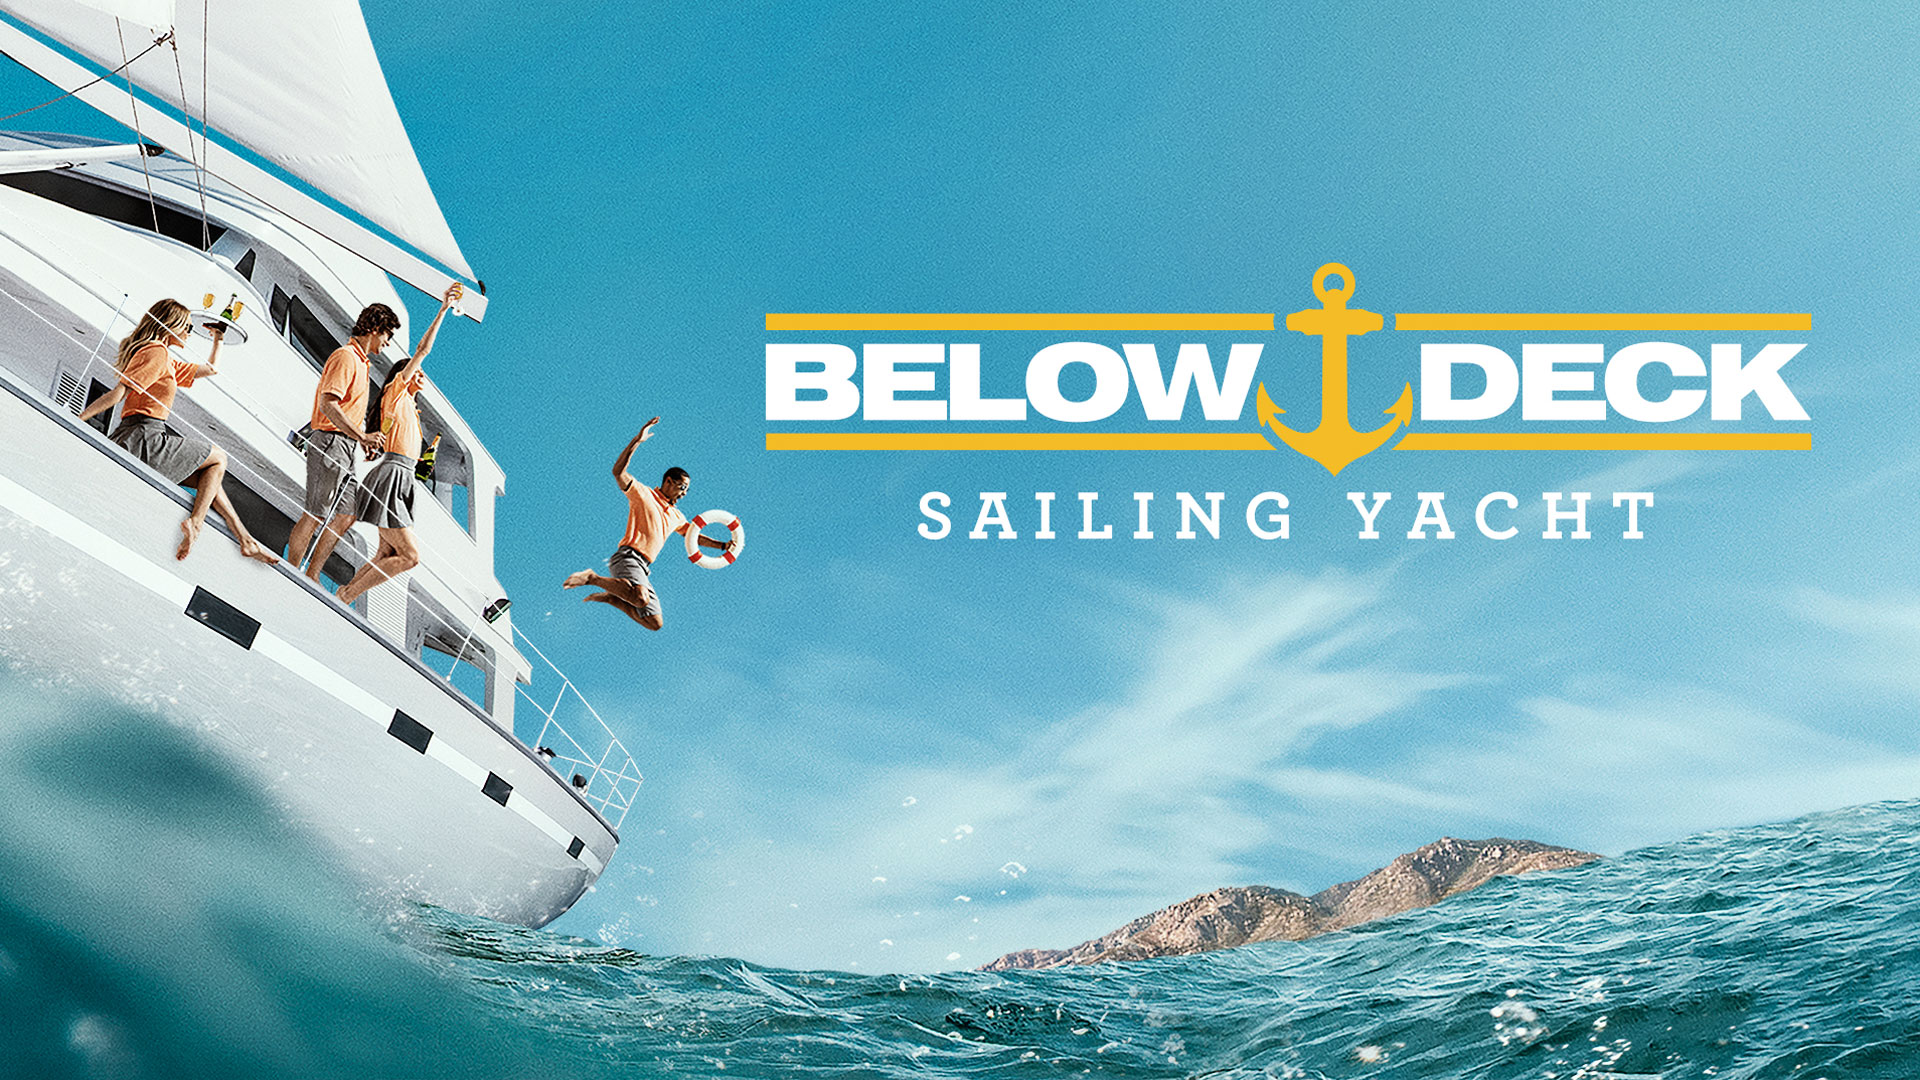 Below Deck Sailing Yacht - New Season February 21. Go to a video page.